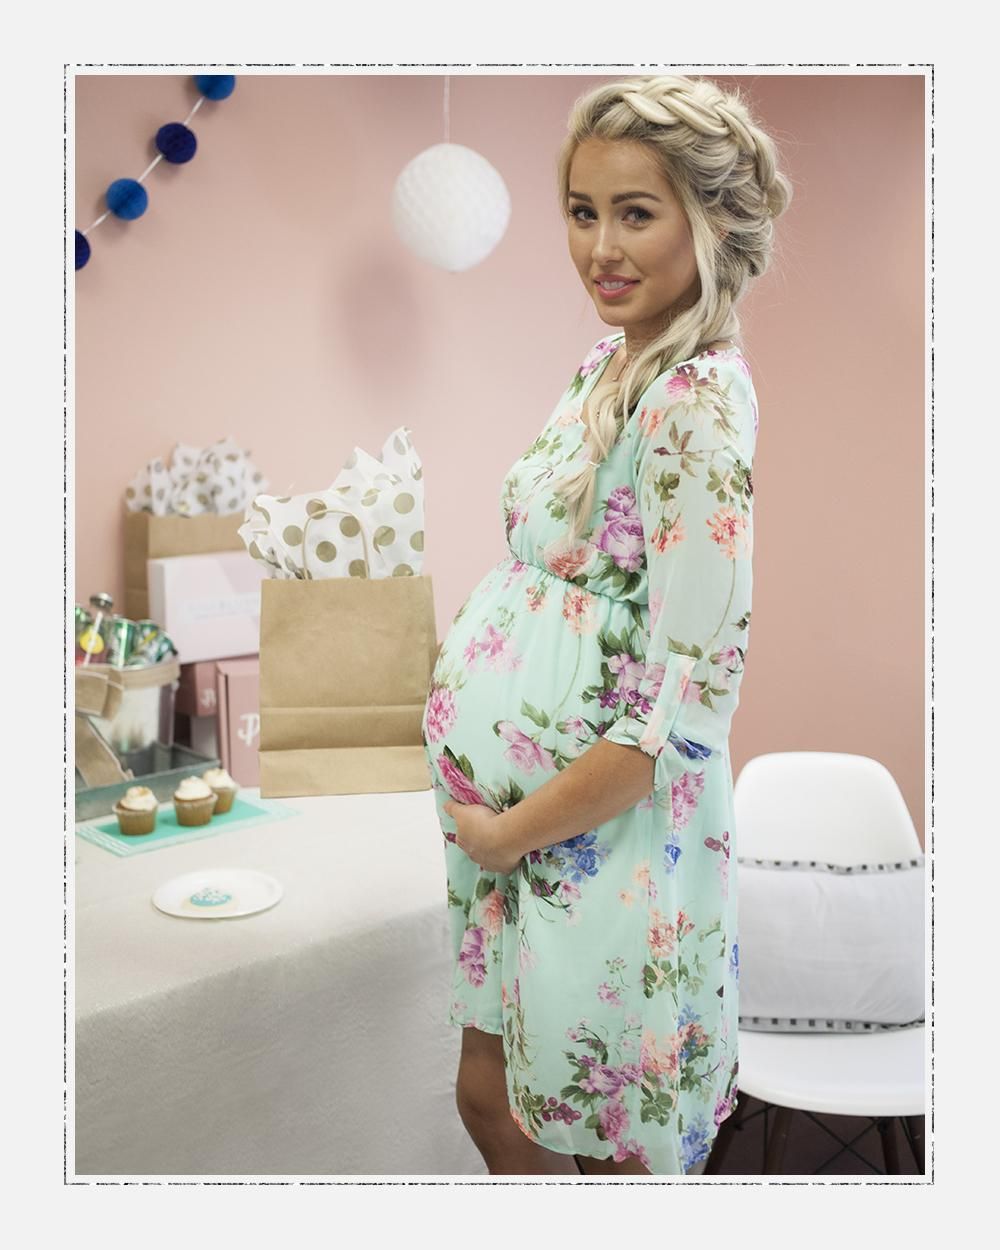 Full Size of Baby Shower:baby Shower Outfits For Dad Baby Shower Outfits For Mom And Dad Baby Shower Outfit For Mom Winter Mom And Dad Shirts For Baby Shower Maternity Gown Style Maternity Stores Near Me Plus Size Maternity Clothes Cheap Maternity Jeans